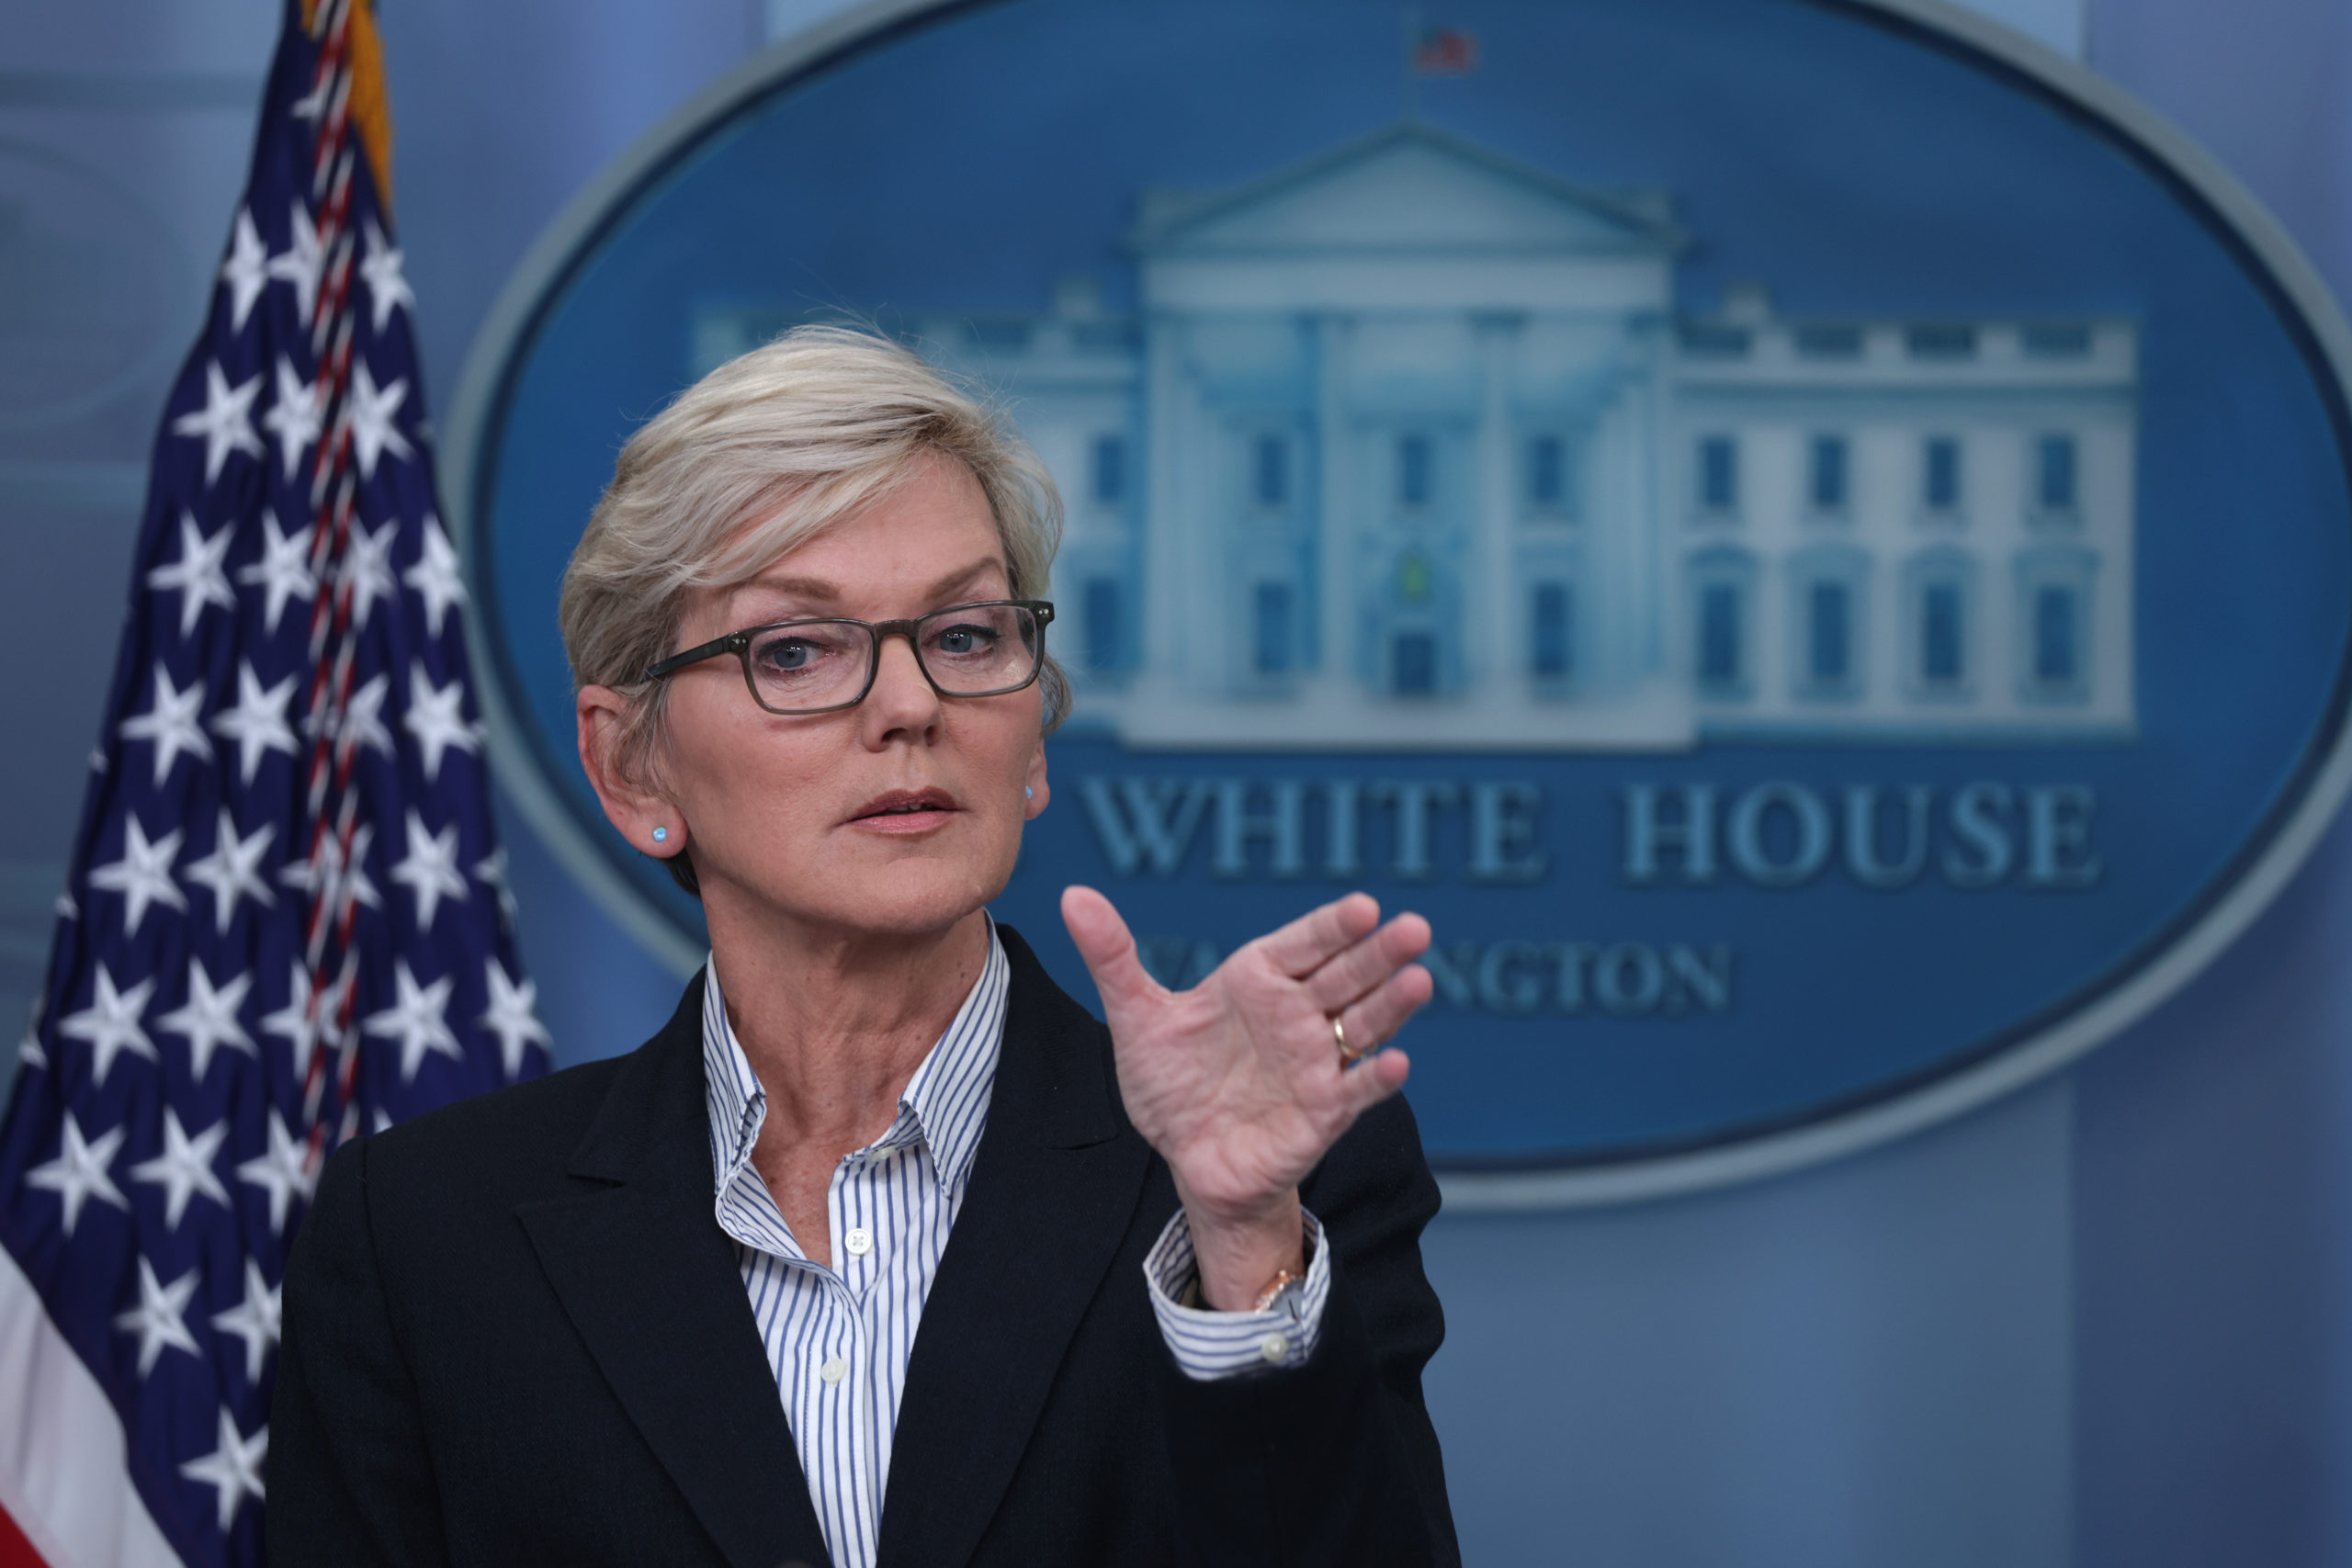 WASHINGTON, DC - JANUARY 23: U.S. Secretary of Energy Jennifer Granholm speaks during a daily news briefing at the James S. Brady Press Briefing Room of the White House on January 23, 2023 in Washington, DC. White Press Secretary Karine Jean-Pierre held a daily news briefing to answer questions from members of the press. (Photo by Alex Wong/Getty Images)